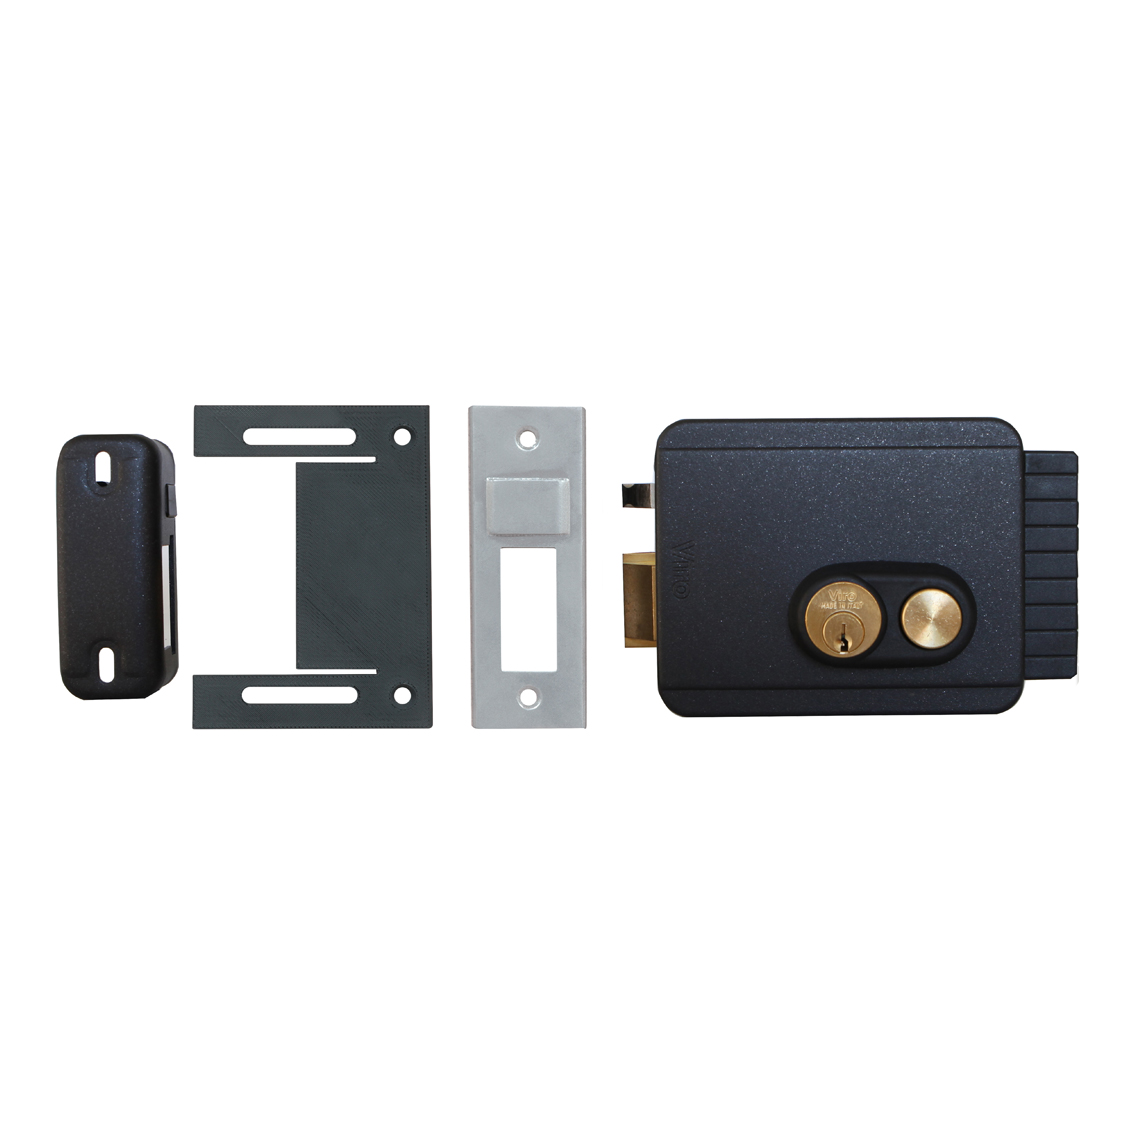 Viro V97 Electric Lock For Left Hand and Outward Opening Swing Gates